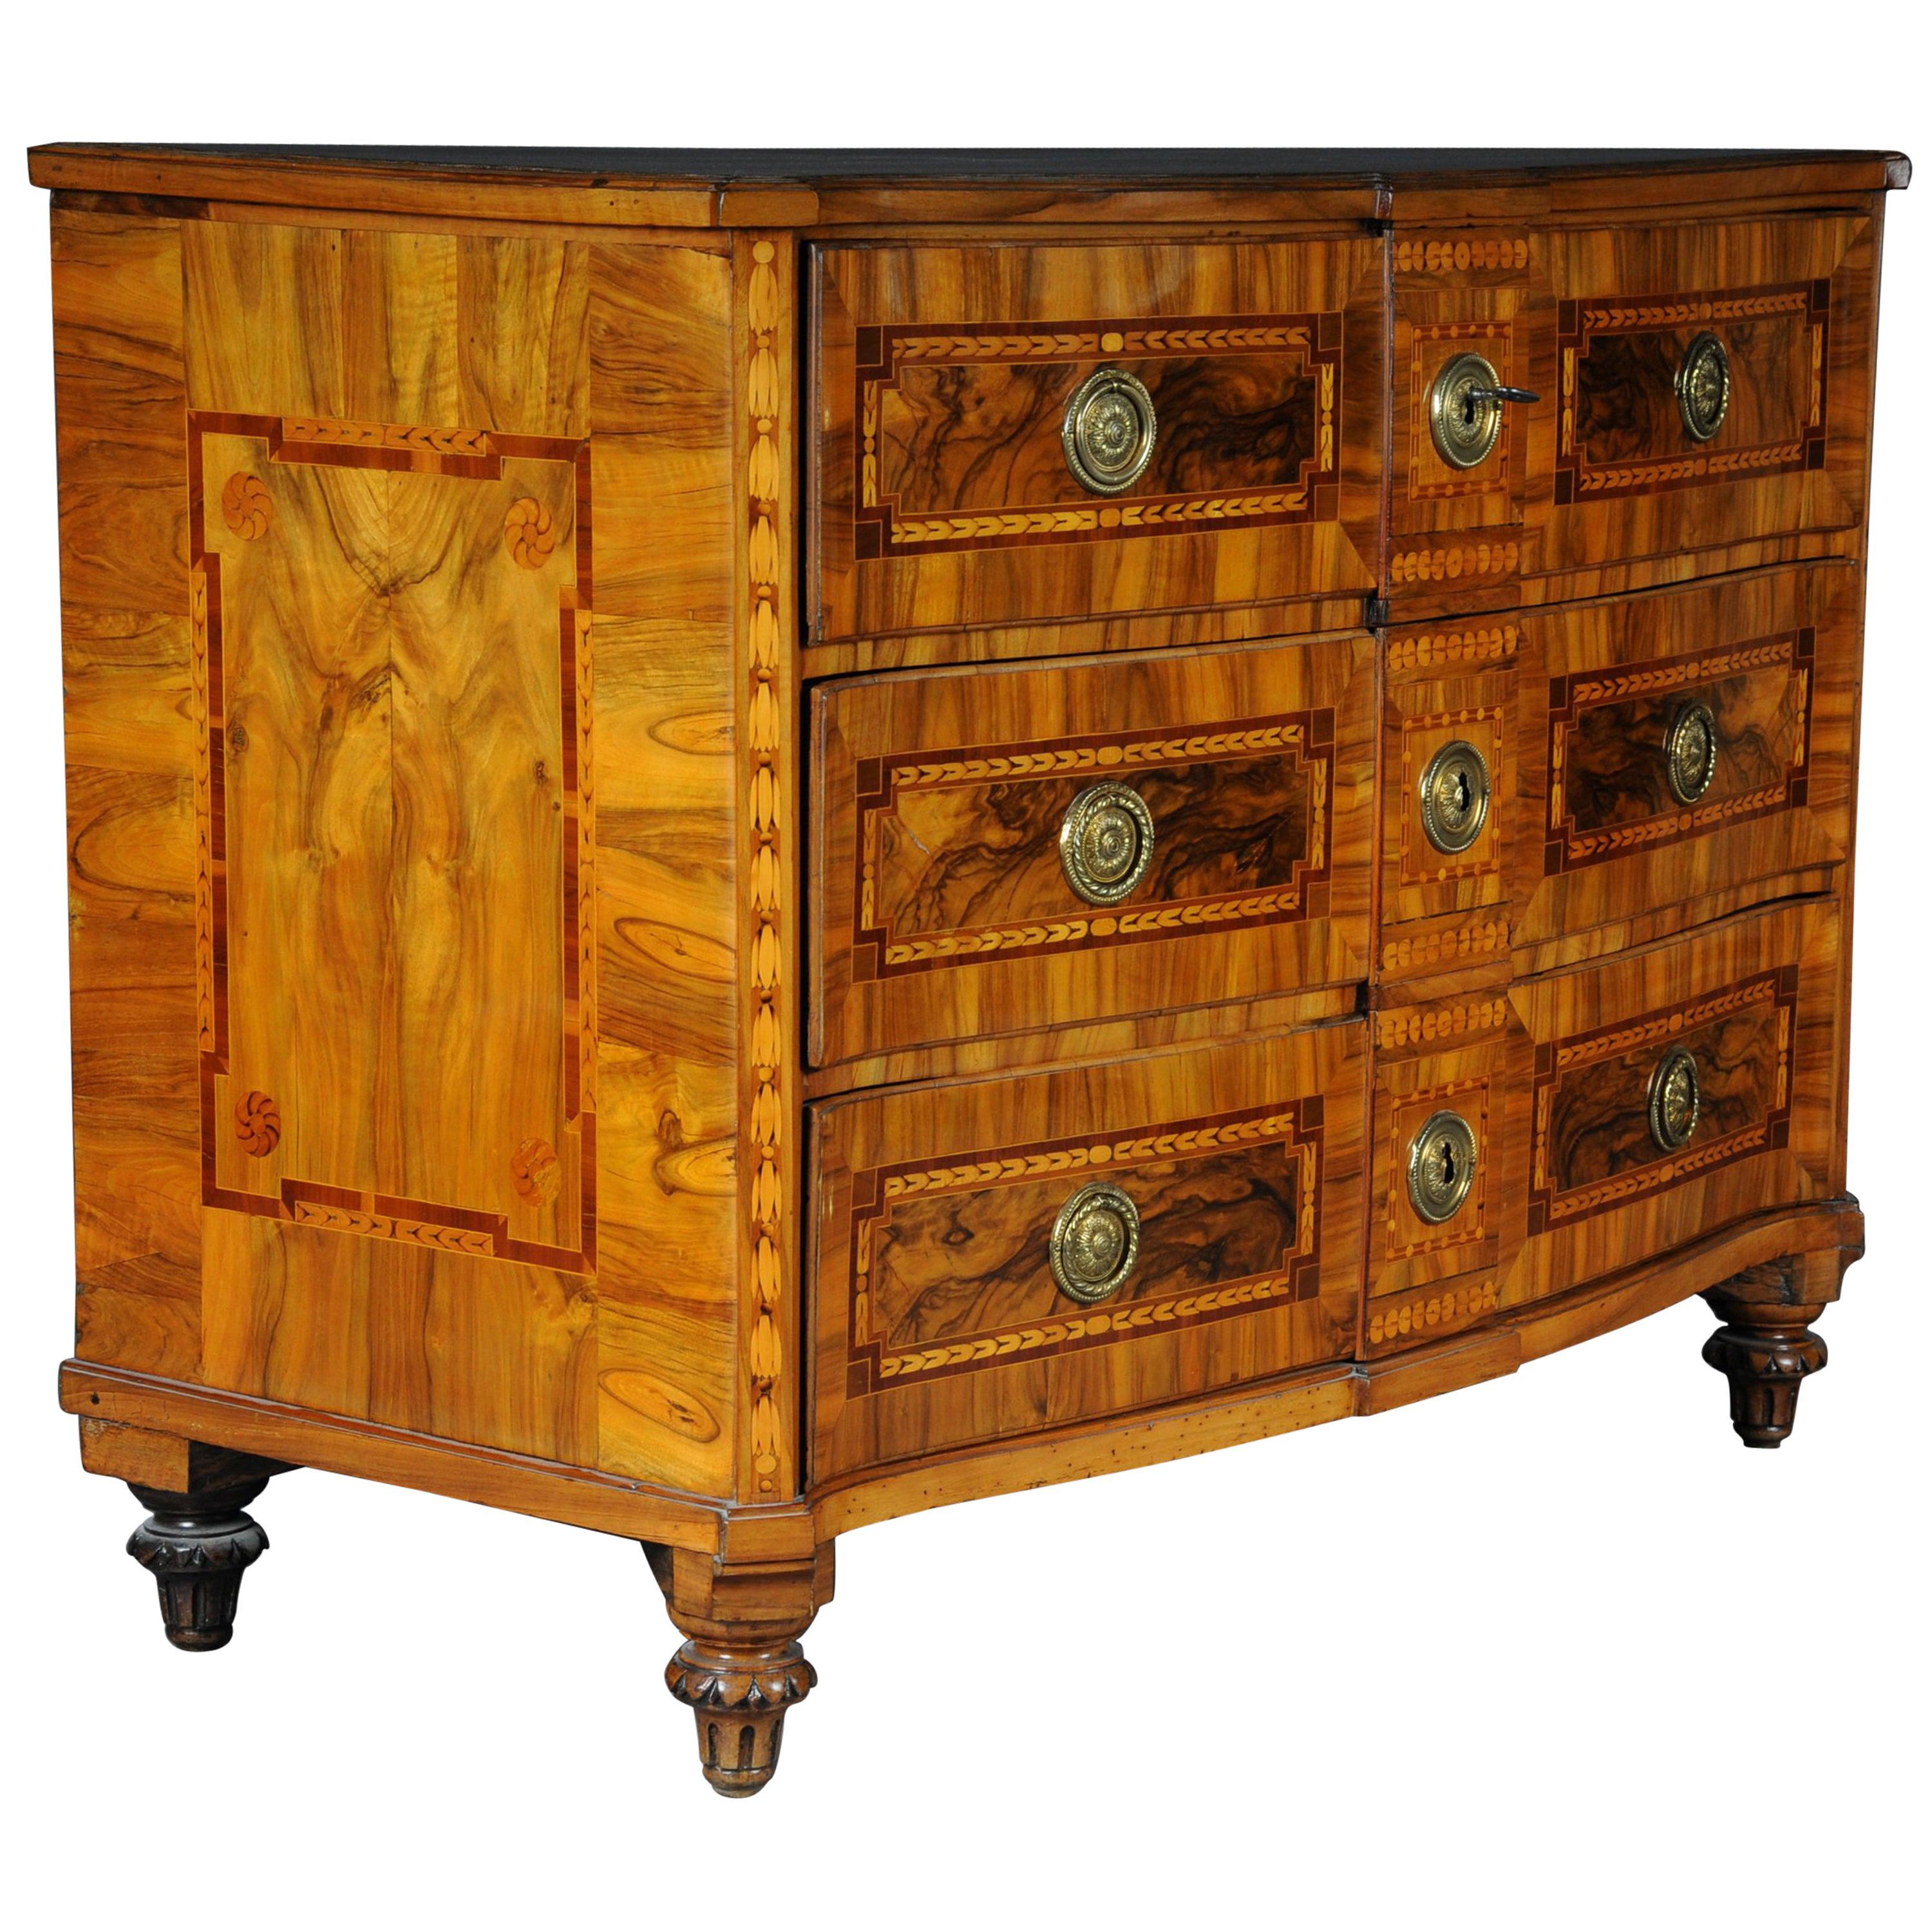 Unique Baroque/Classicism Chest of Drawers, Germany Walnut